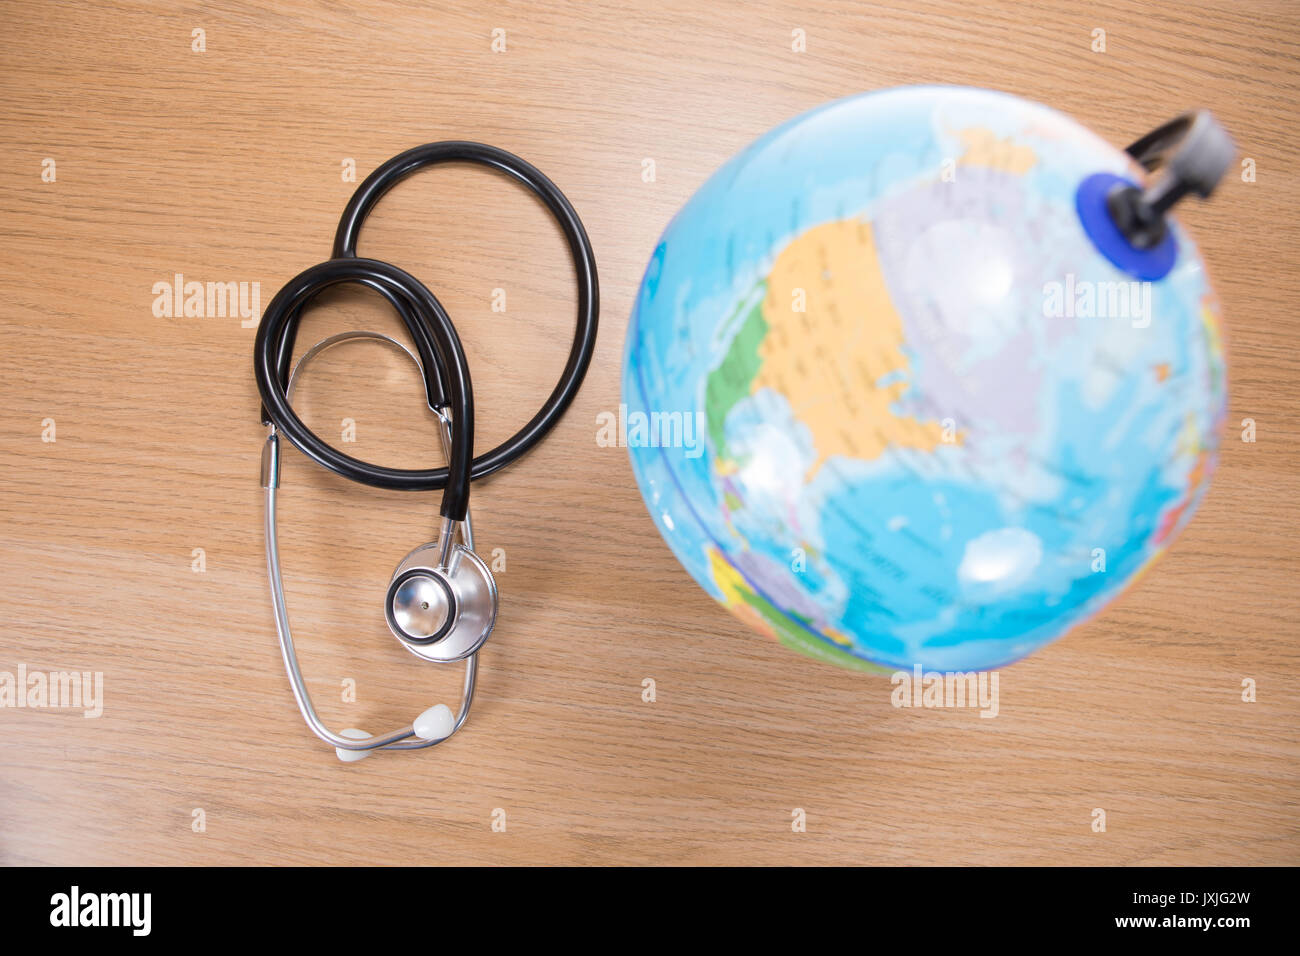 High angle view of acoustic stethoscope lying next to globe against wooden background Stock Photo